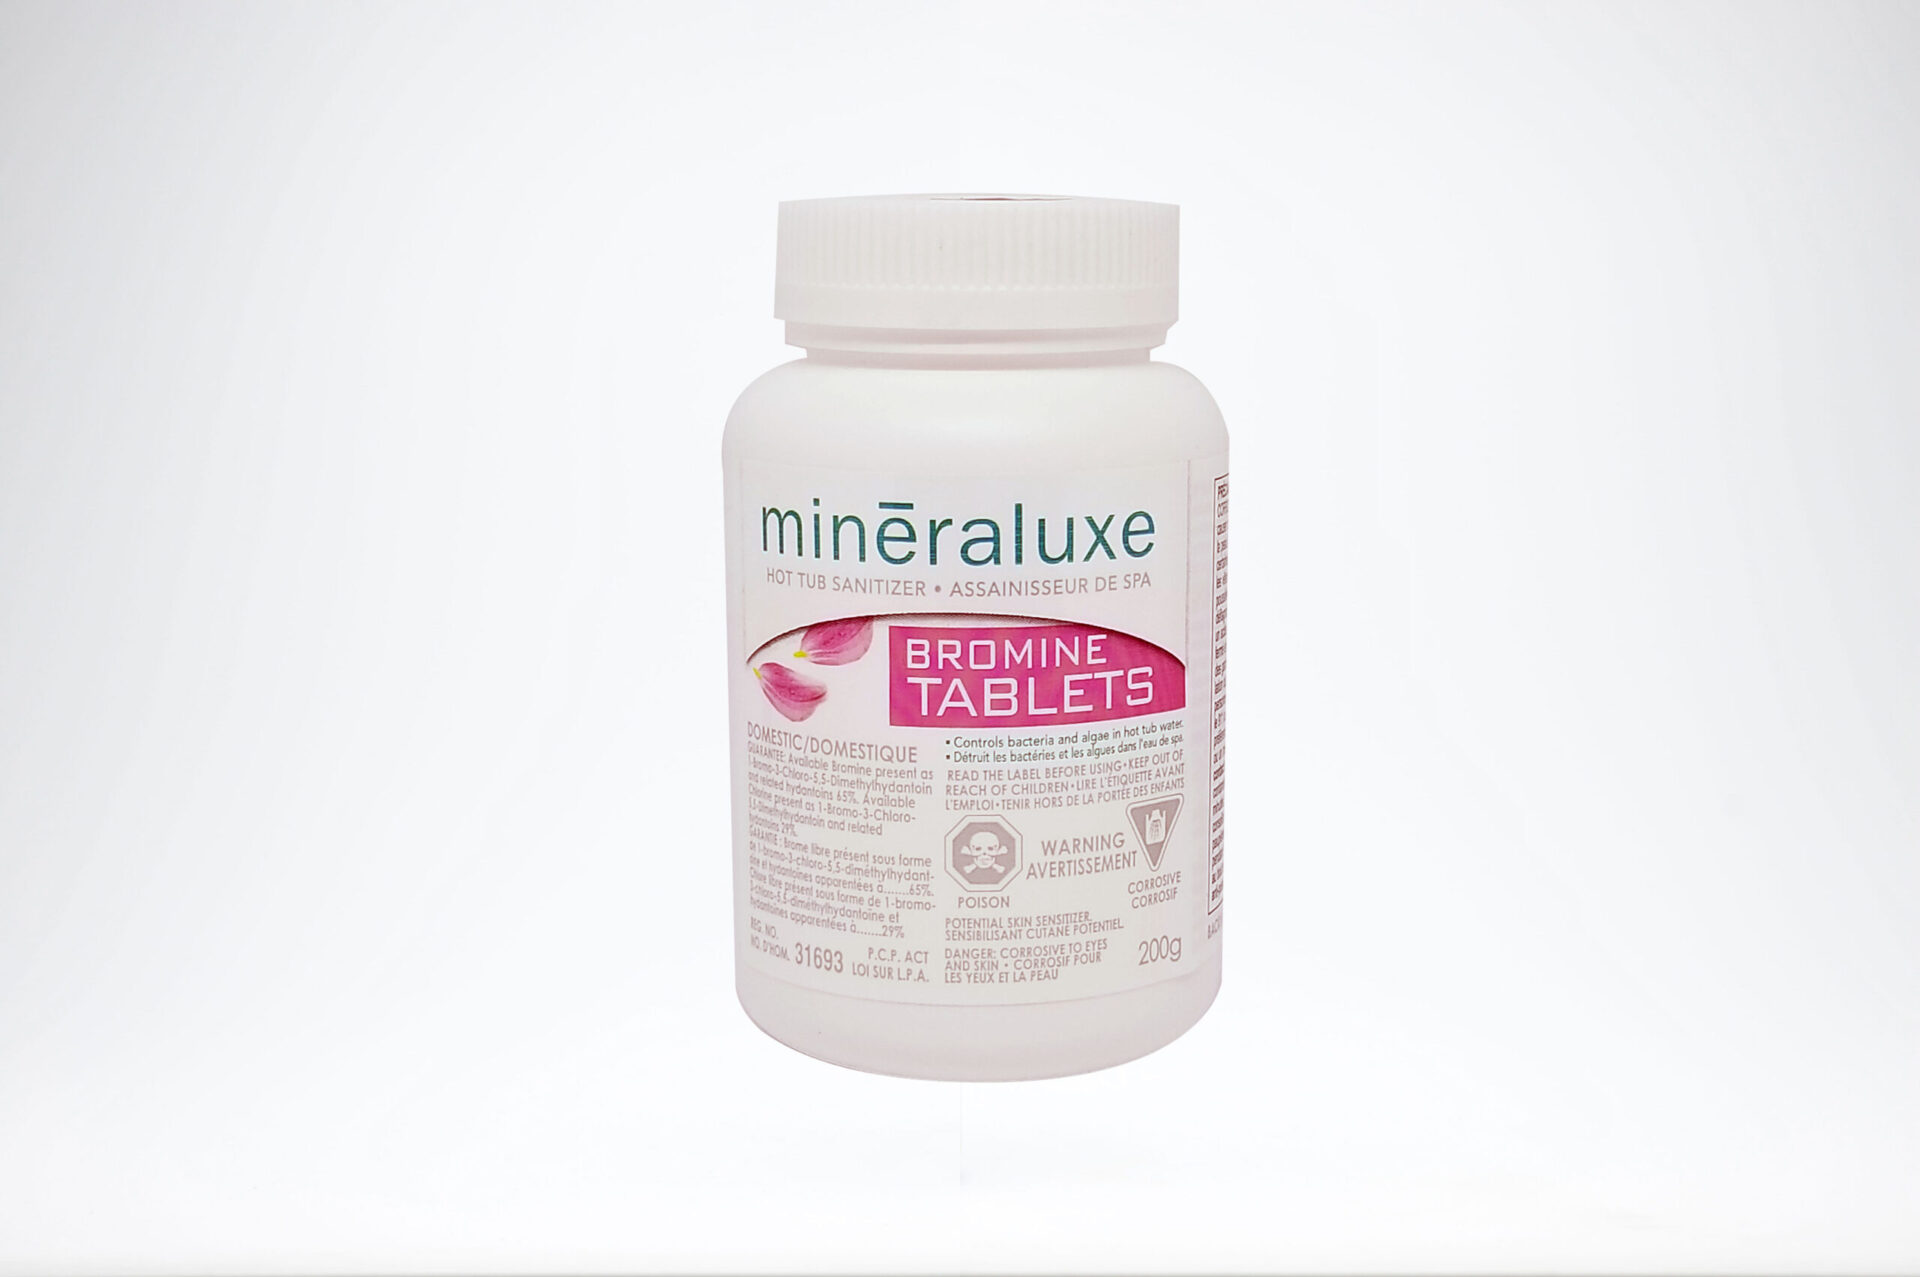 Mineraluxe Bromine Tabs 200g 1 scaled - MINERALUXE BROMINE TABS - 200g